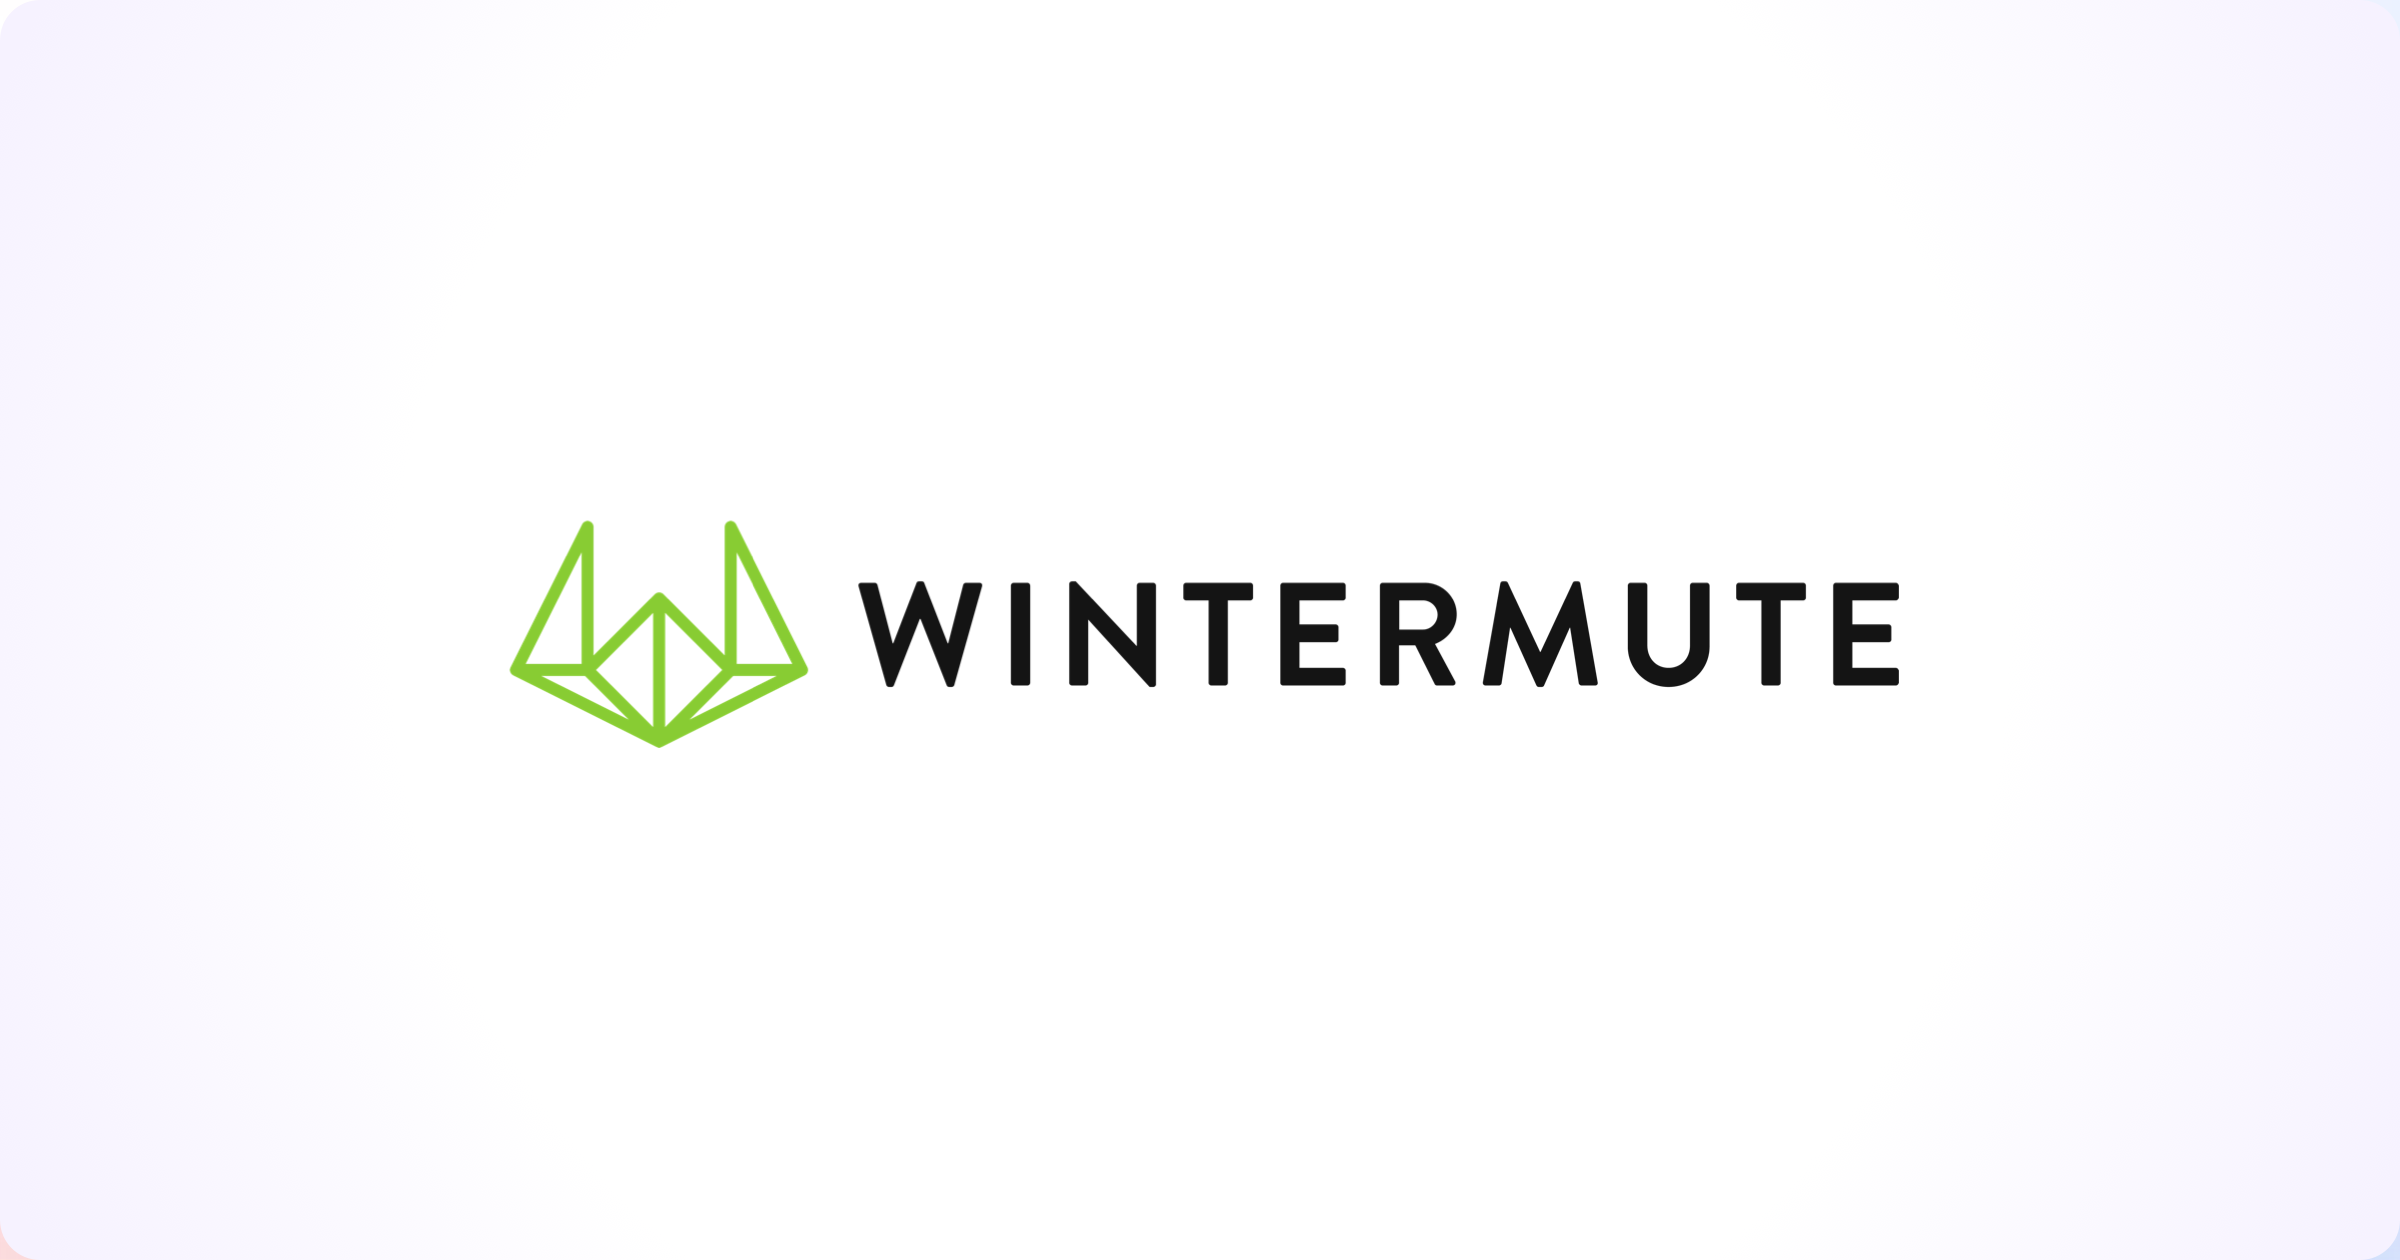 How Wintermute is using USDC to convert crypto into life-saving equipment